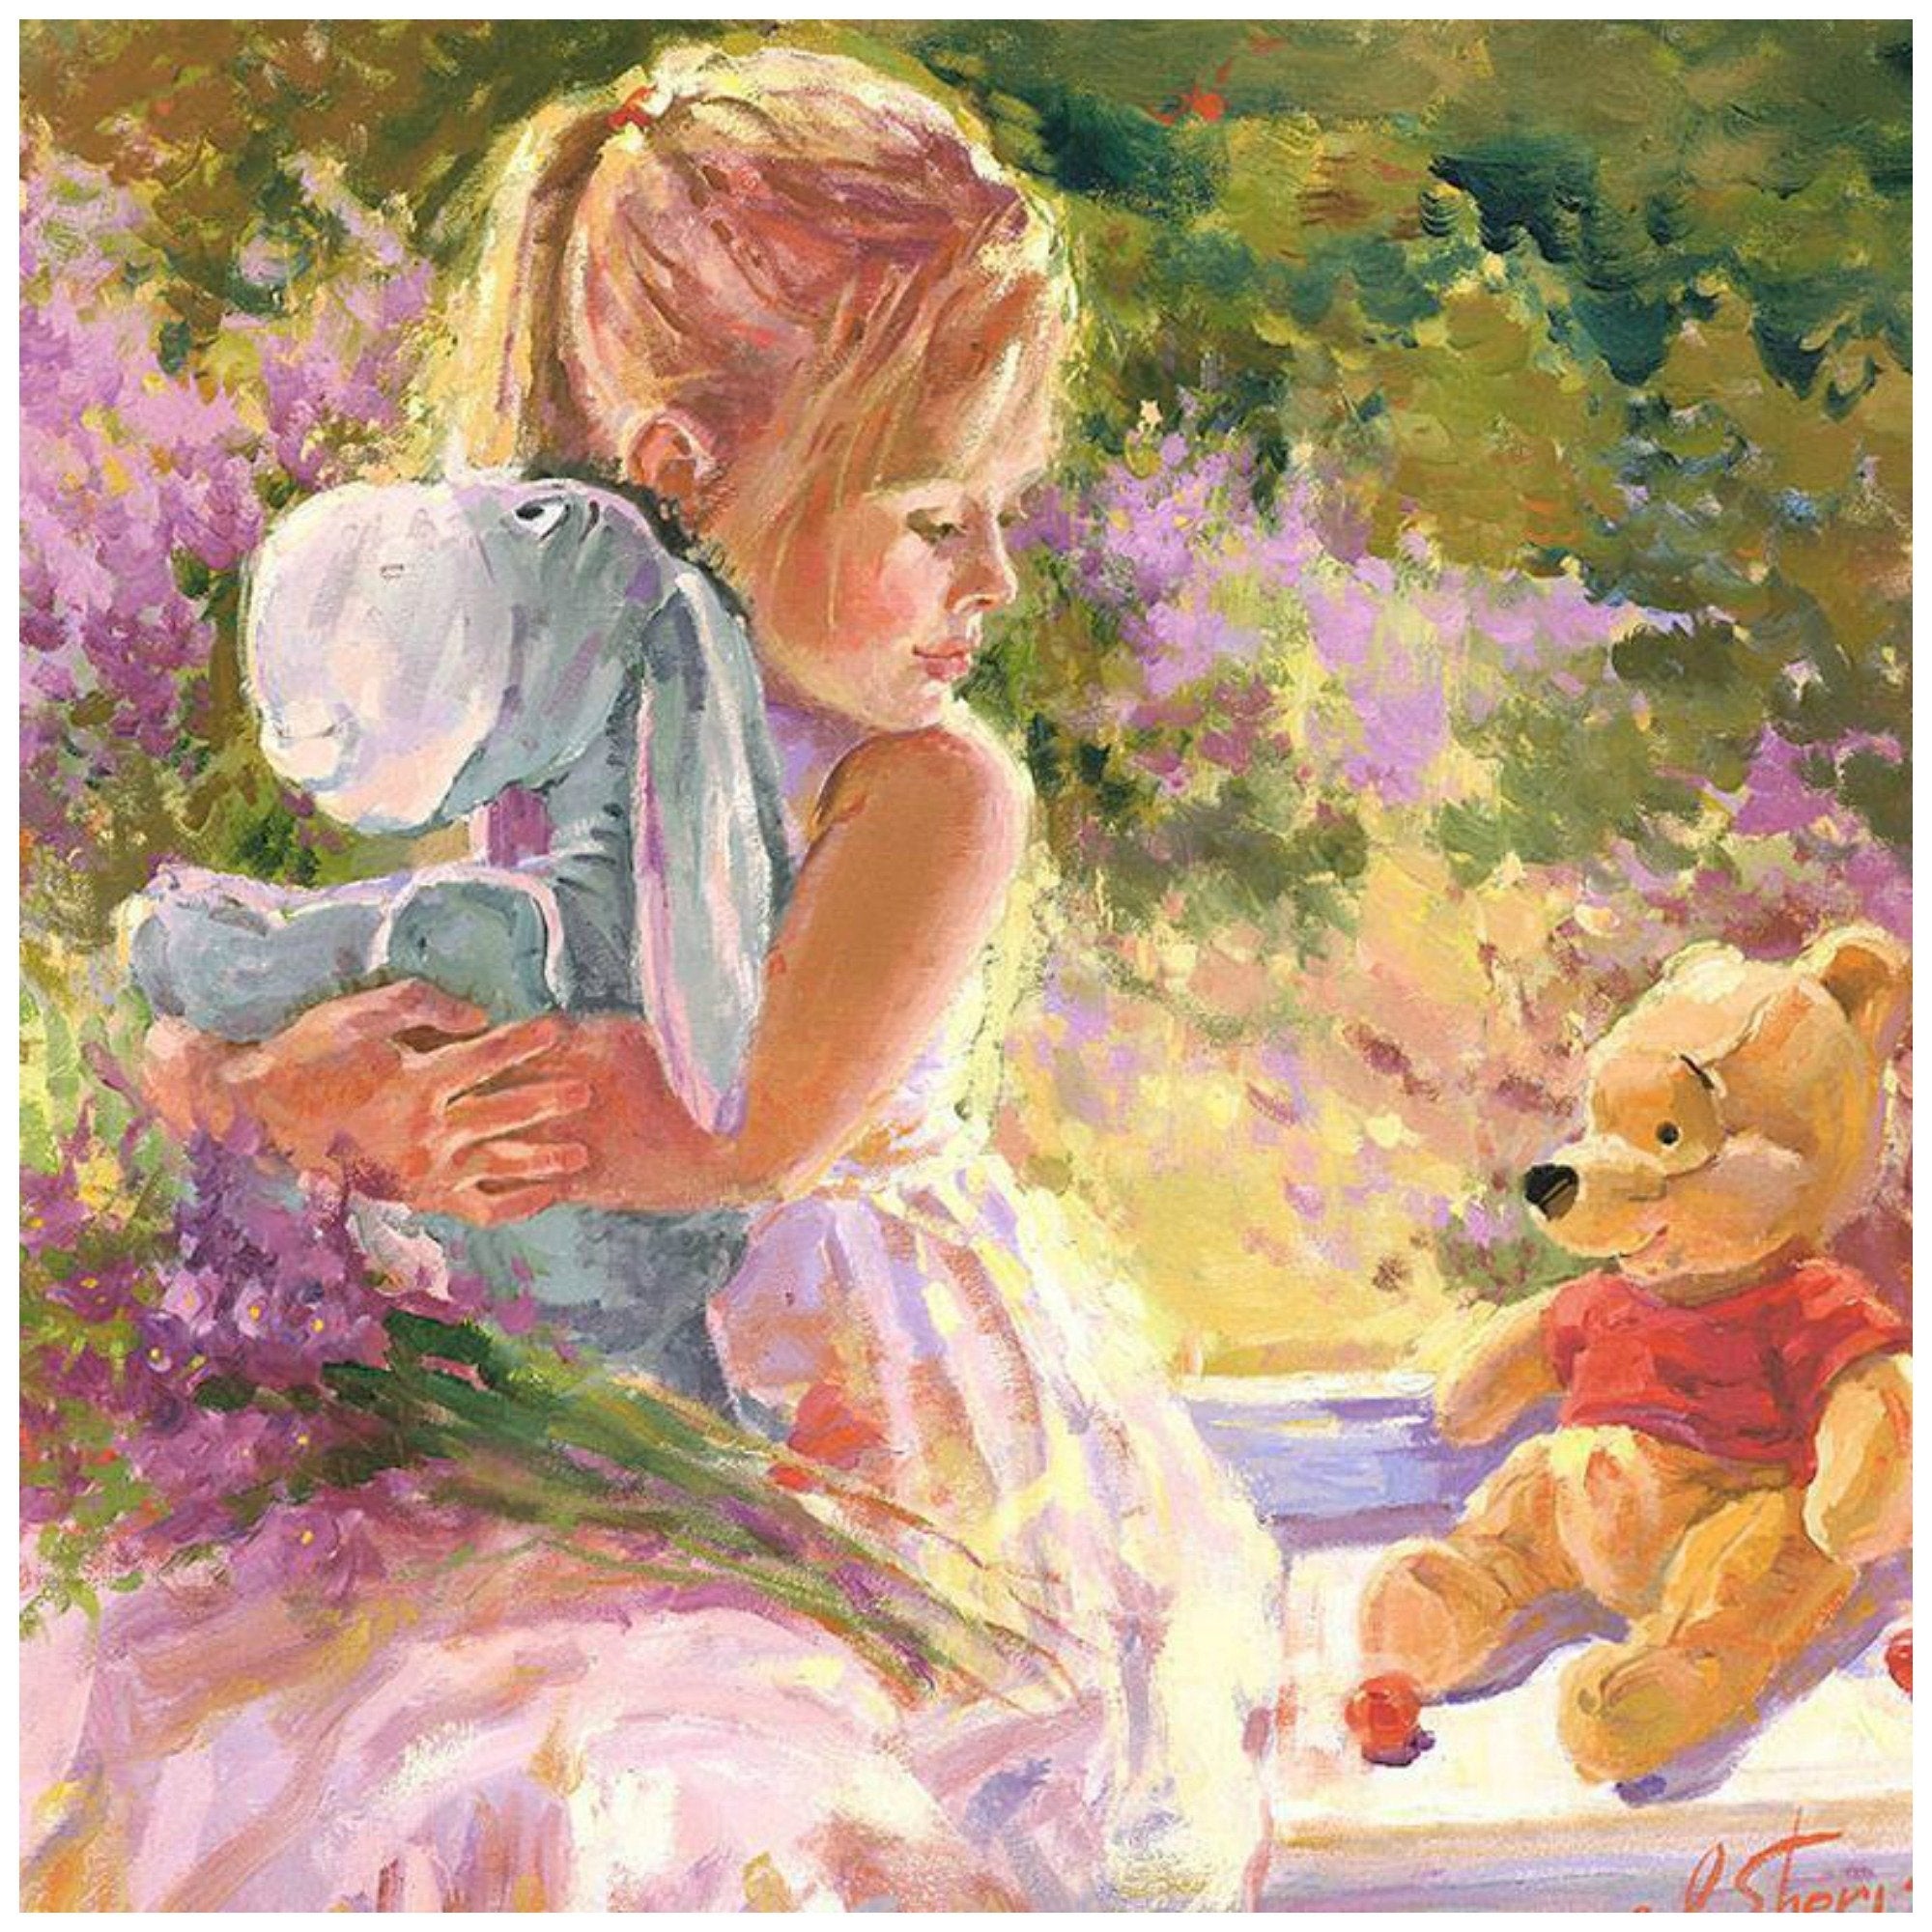 Sunny Window by Irene Sheri  Little girl sits on a bench holding her favorite stuff animal Eeyore, Winnie the Pooh sits next to her - closeup